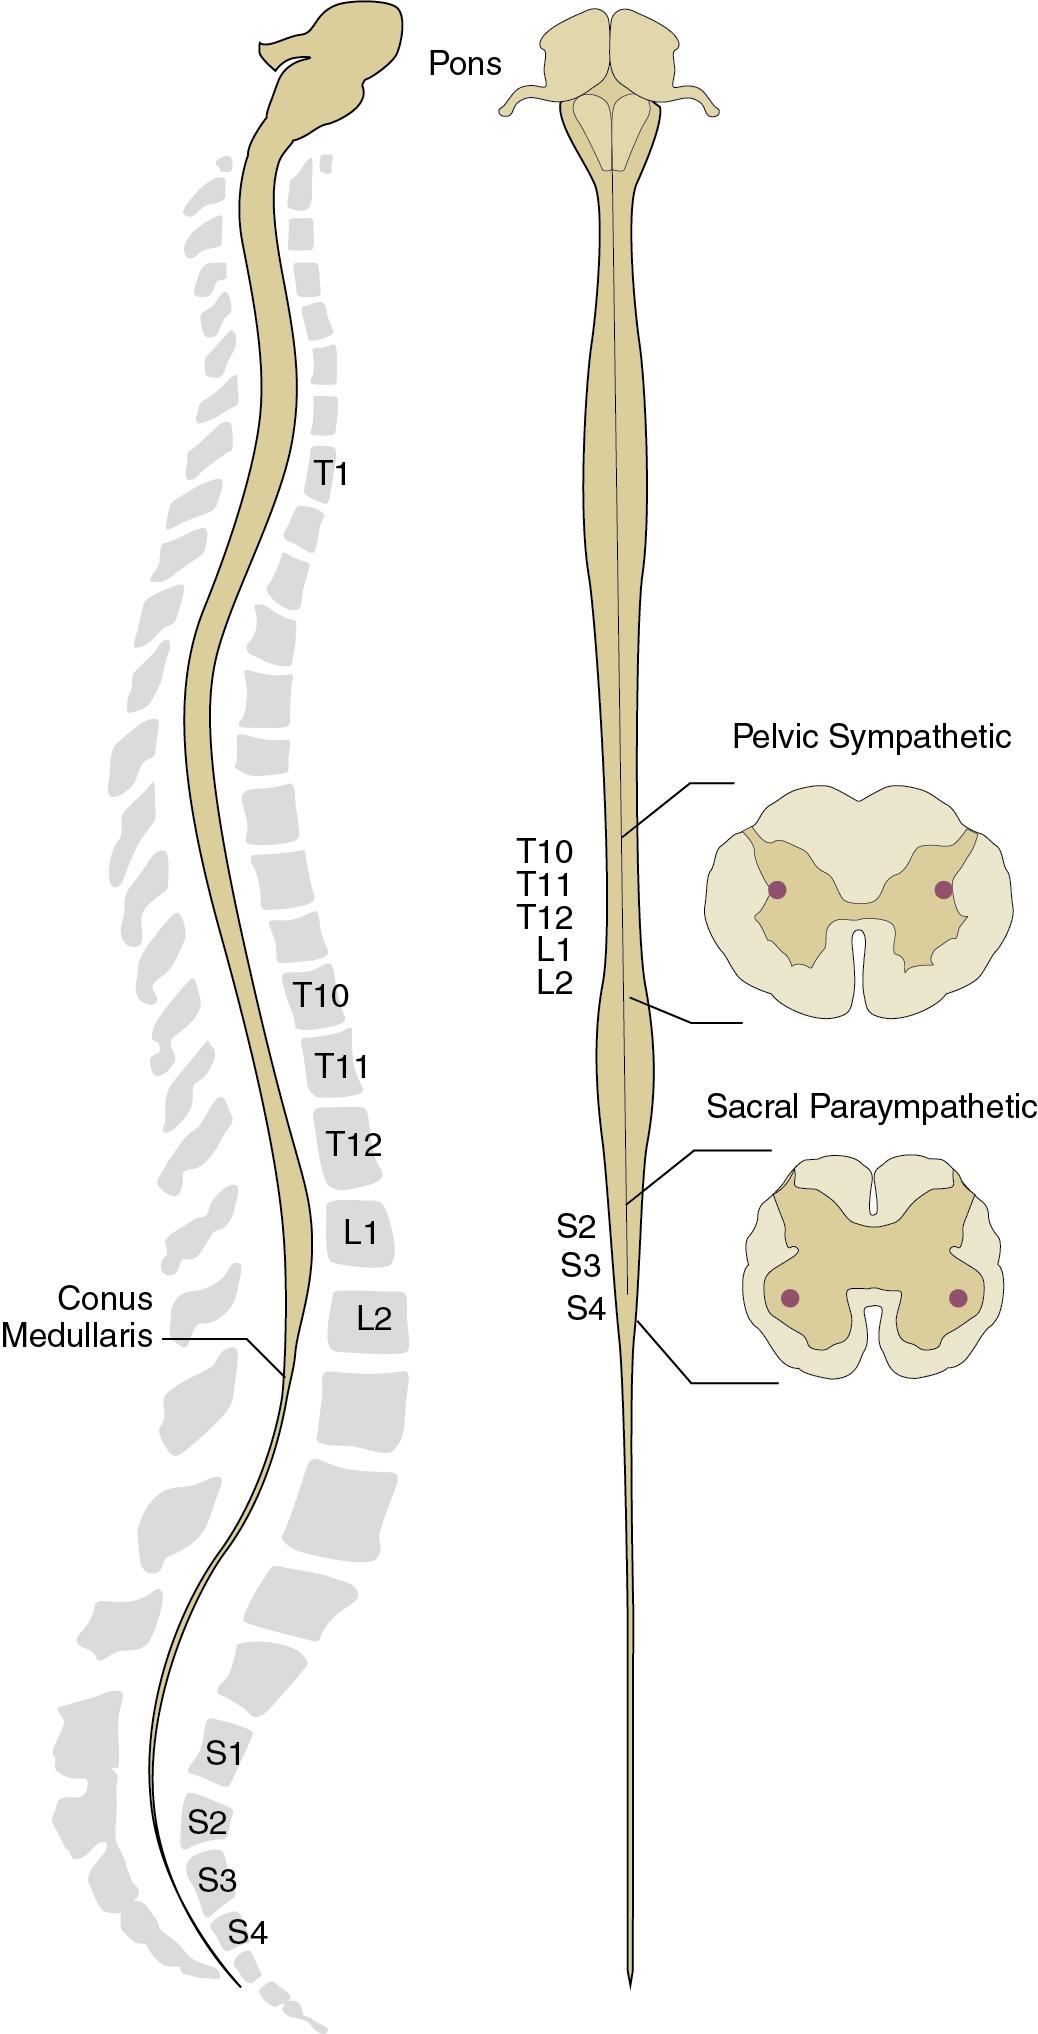 Fig. 3.1, Relationship of bony vertebral segments and relative locations of pelvic sympathetic and parasympathetic neurons, including cross-sectional views of the spinal cord. Note that the neuronal cell bodies do not exactly correlate with the bony spine. For example, sacral neuronal cell bodies are actually located at the rostral bony lumbar levels, with their projections traversing through the conus medullaris and cauda equina.